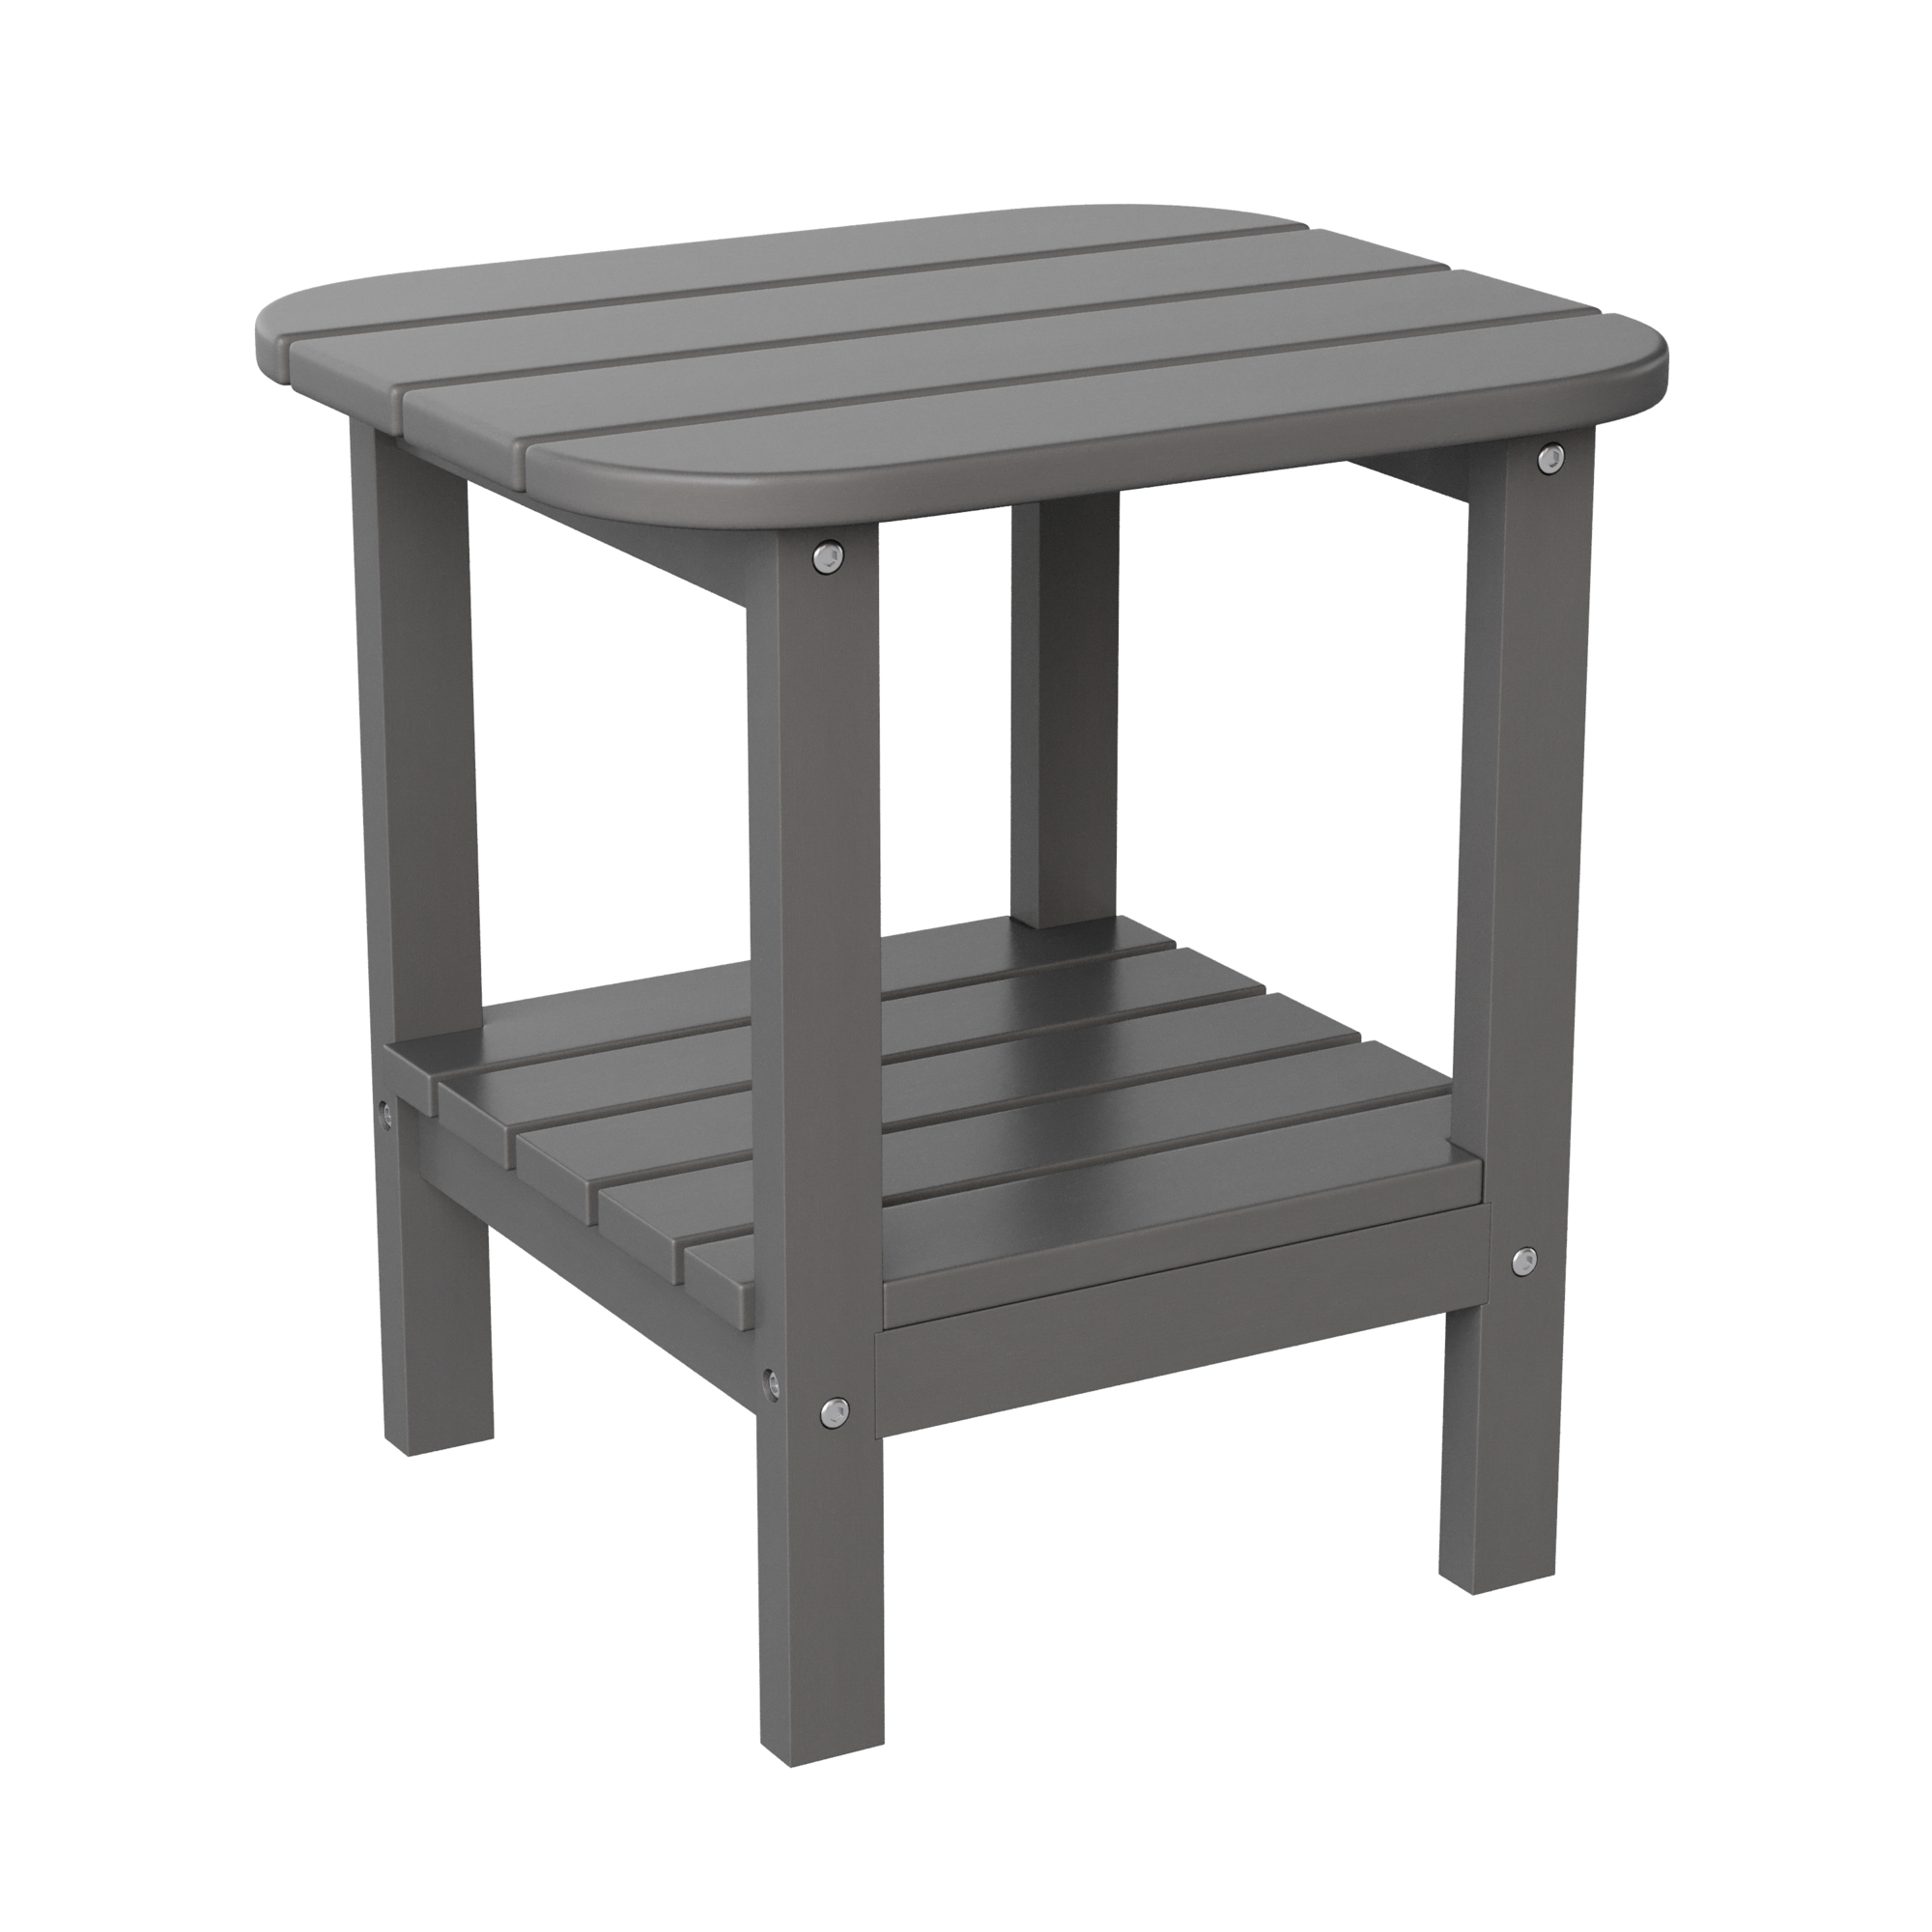 Flash Furniture, Gray 2 Tier Adirondack Style Patio Side Table, Table Shape Rectangle, Primary Color Gray, Height 17.75 in, Model LEHMP1351517HGY